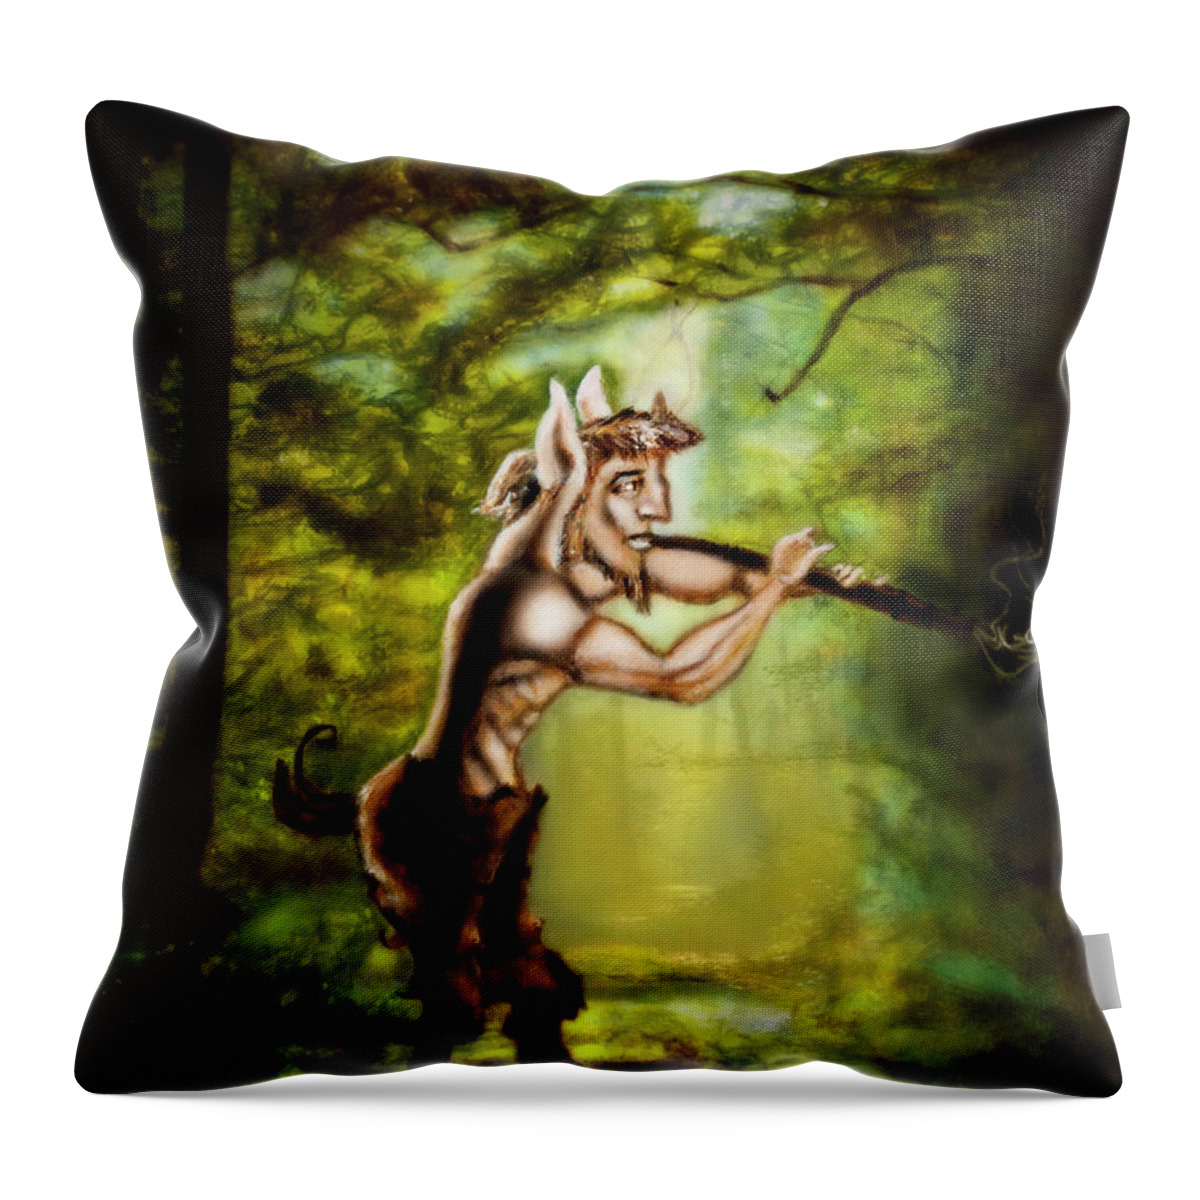 Pan Throw Pillow featuring the painting In Search of Reality by David Martin